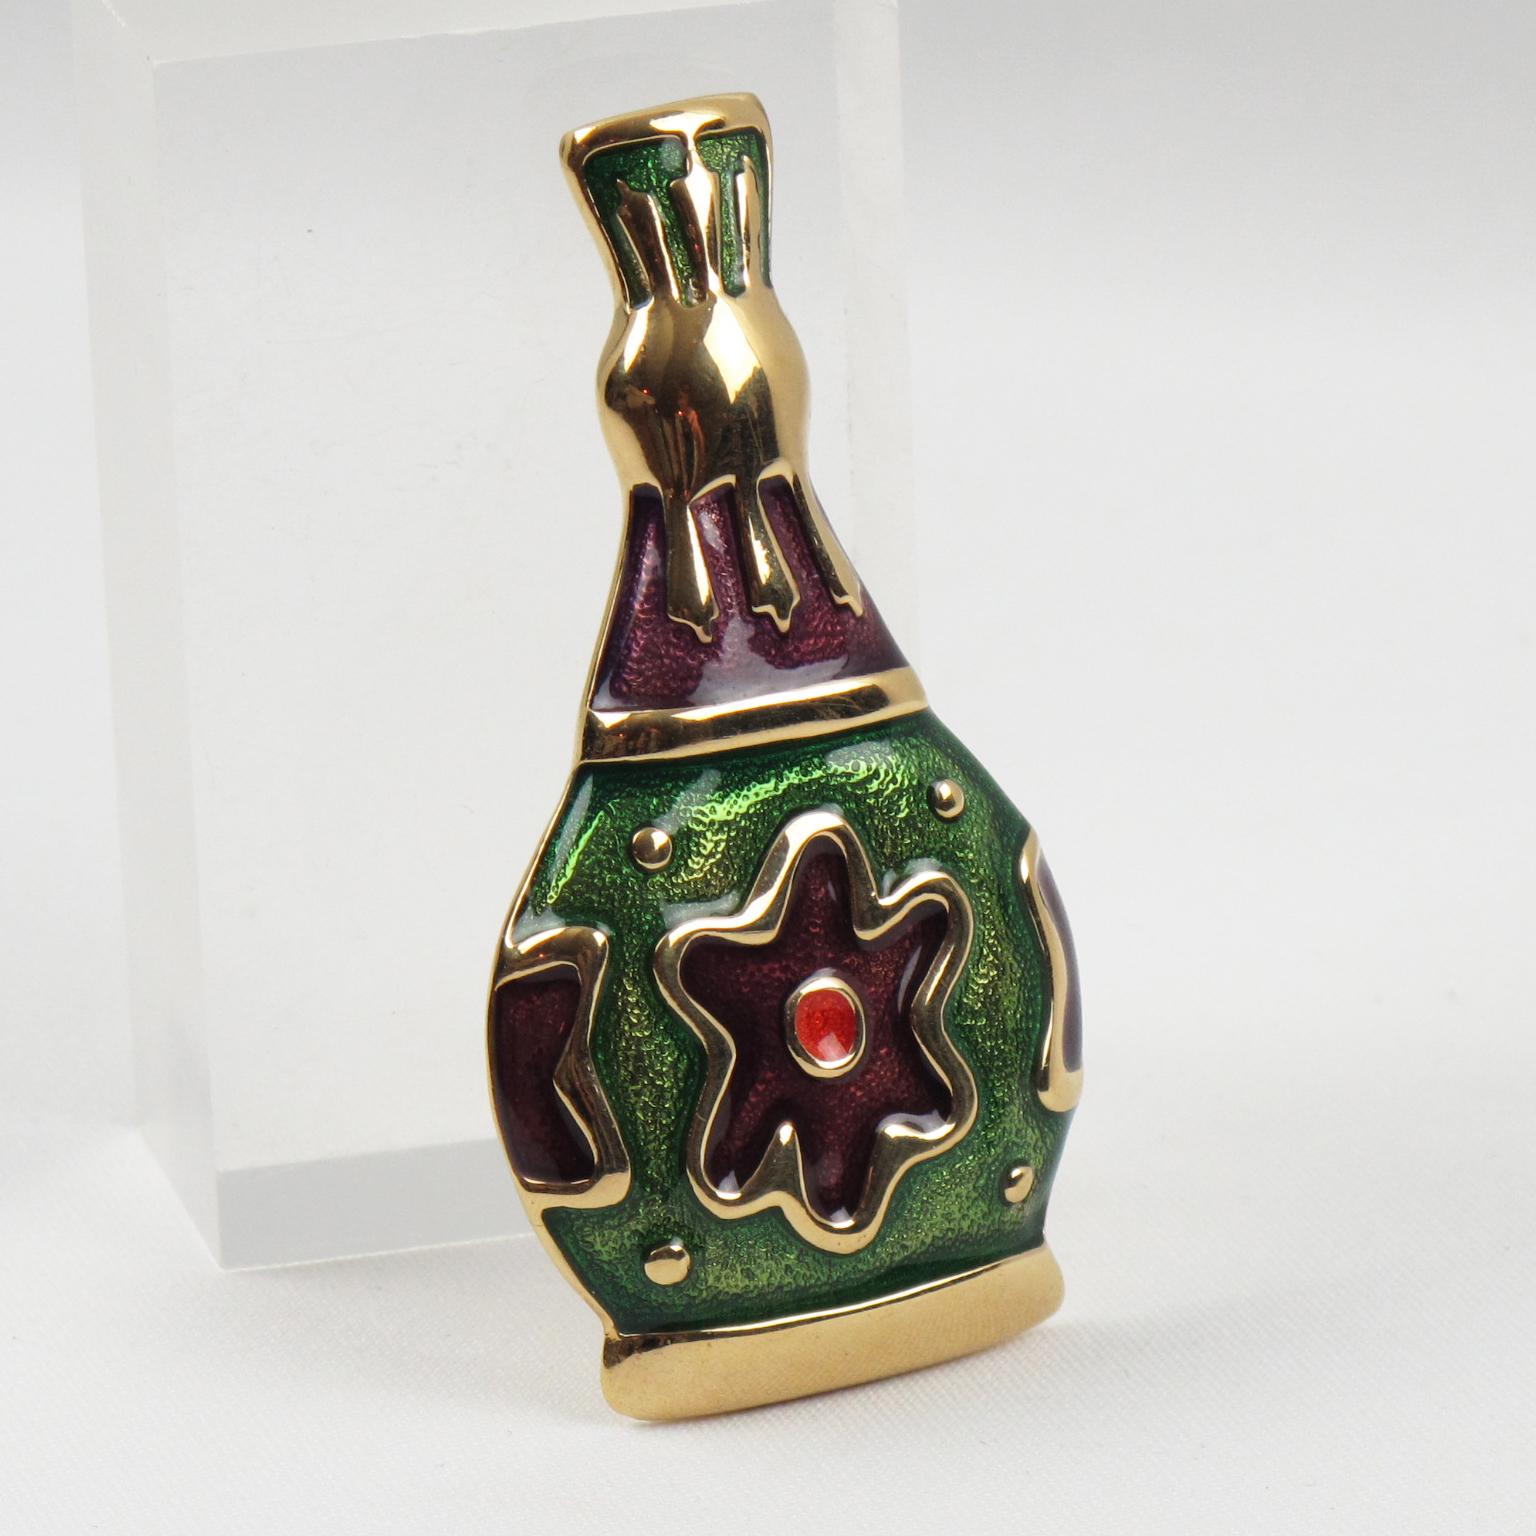 Baroque Revival Givenchy Pin Brooch Gilt Metal Bottle with Green and Purple Enamel For Sale